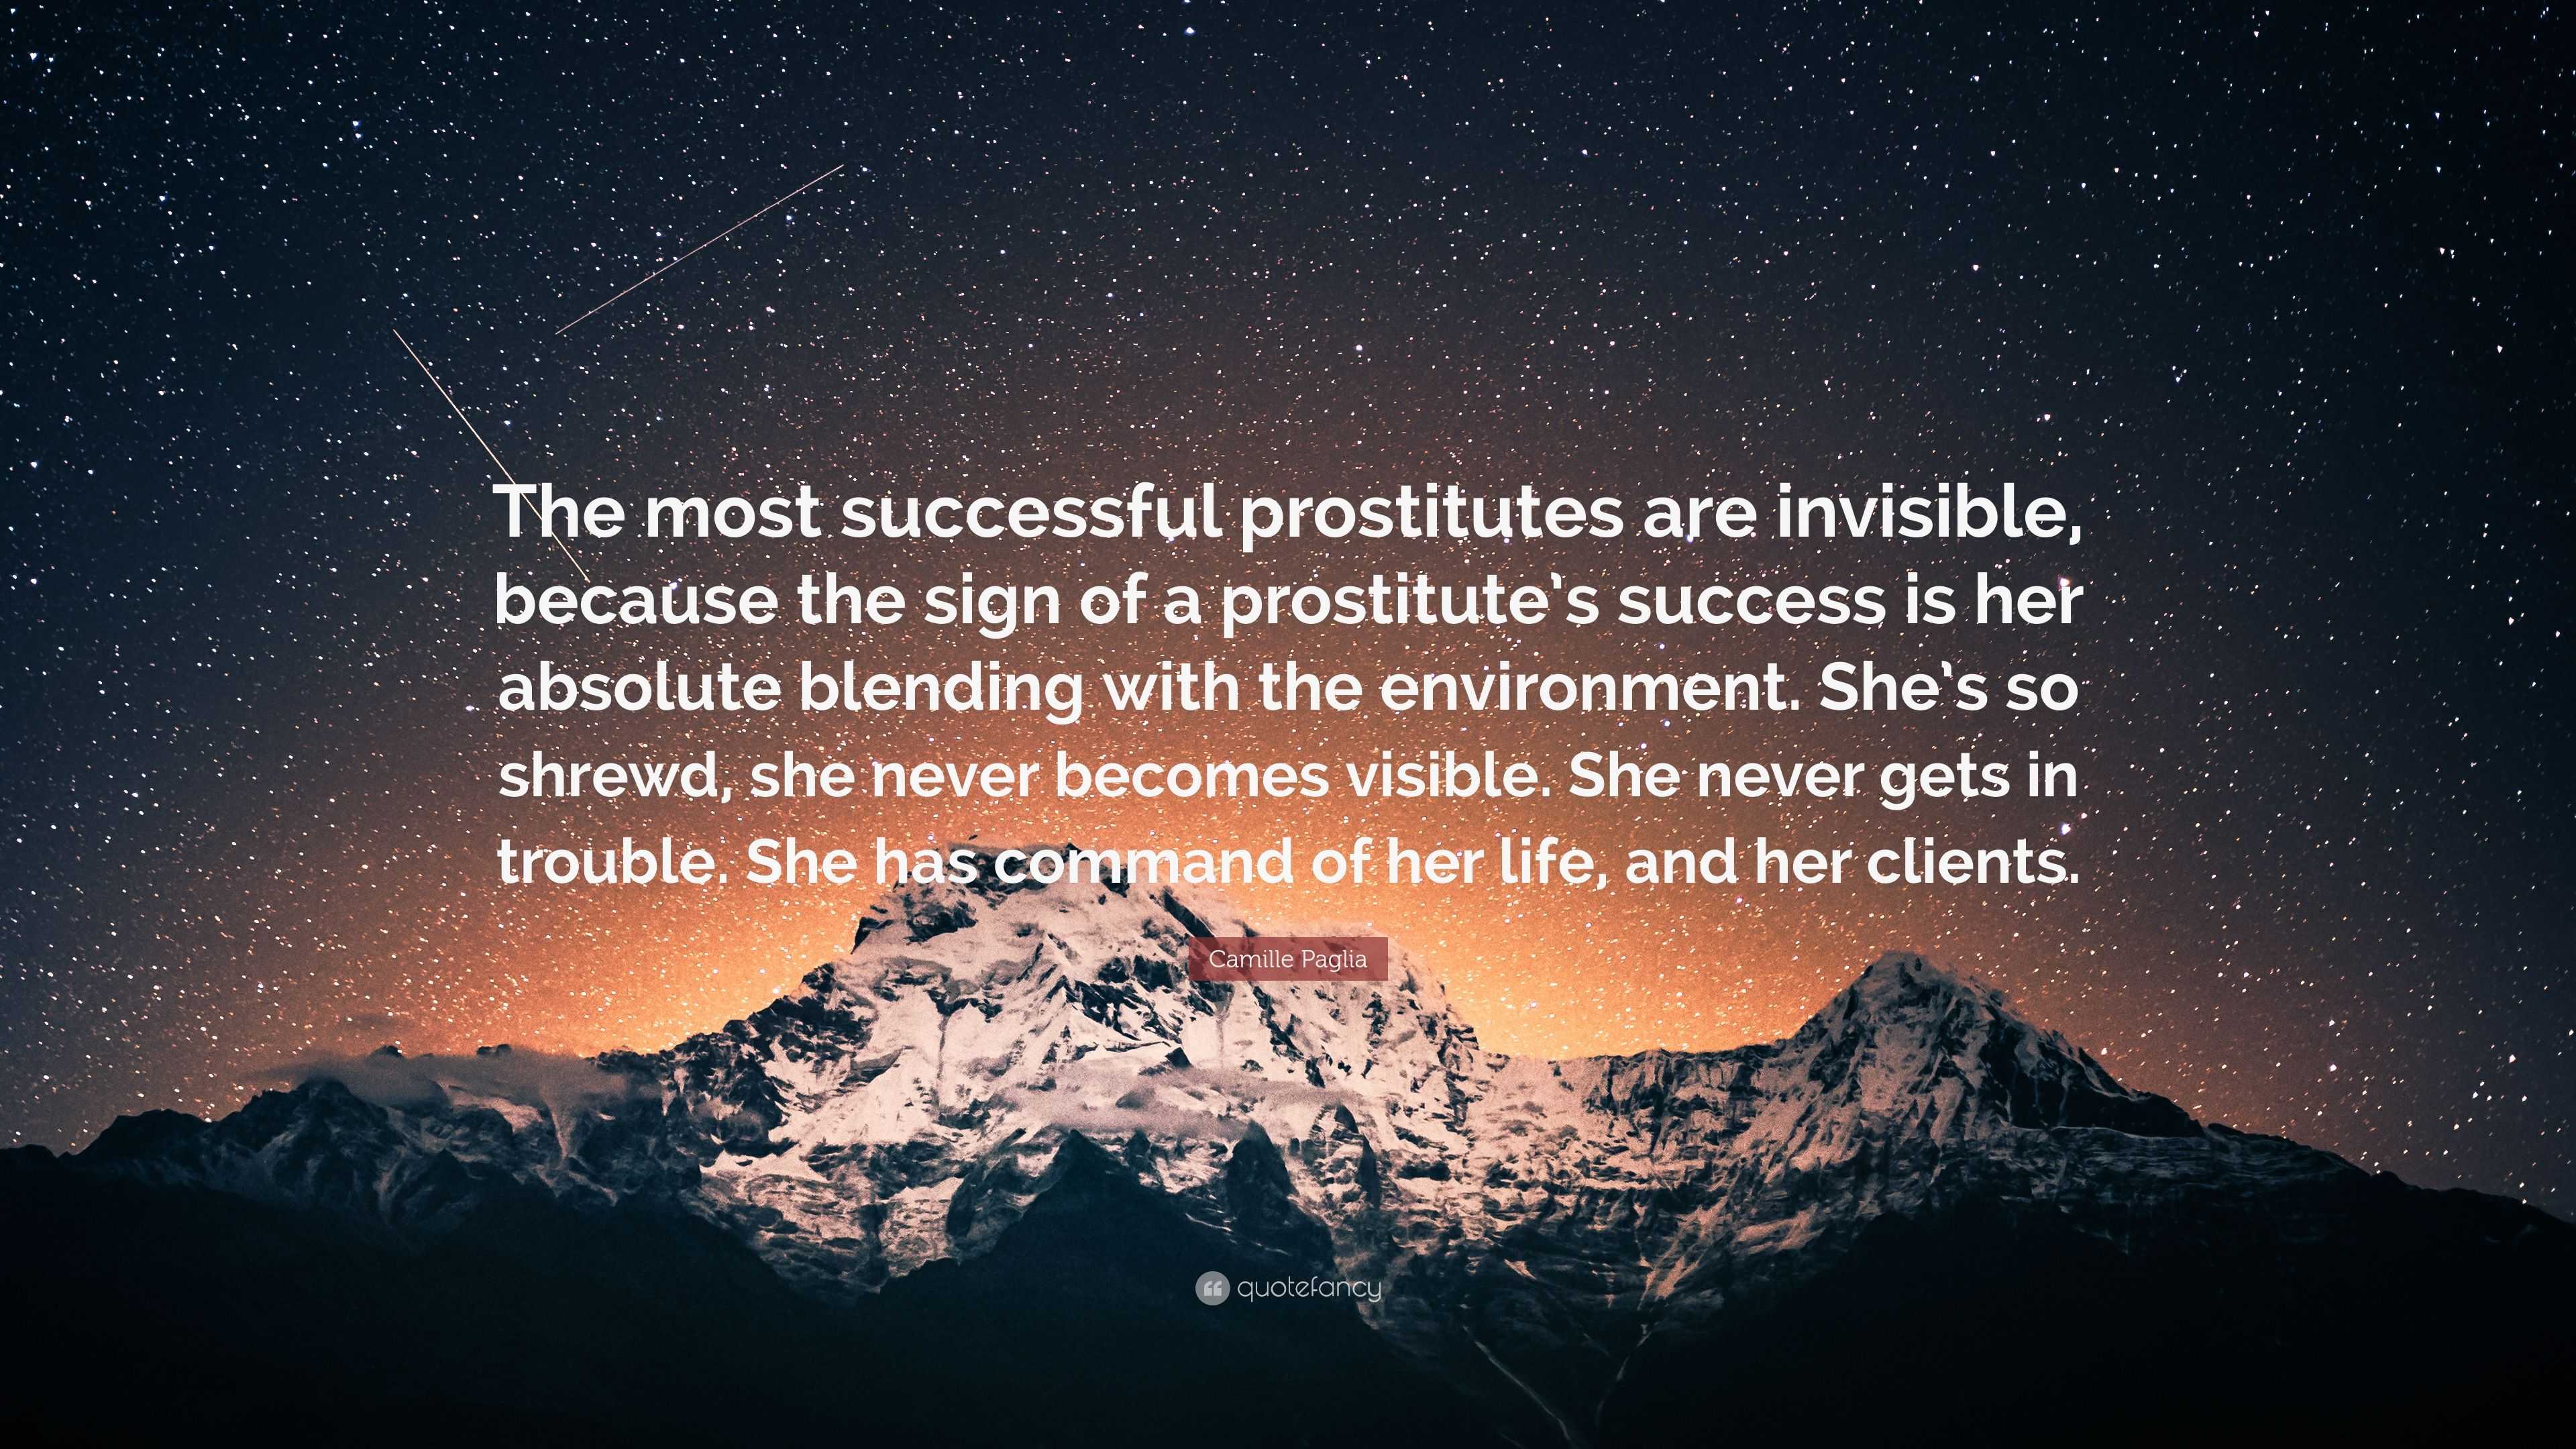 Camille Paglia Quote: “The most successful prostitutes are invisible,  because the sign of a prostitute's success is her absolute blending with  ”